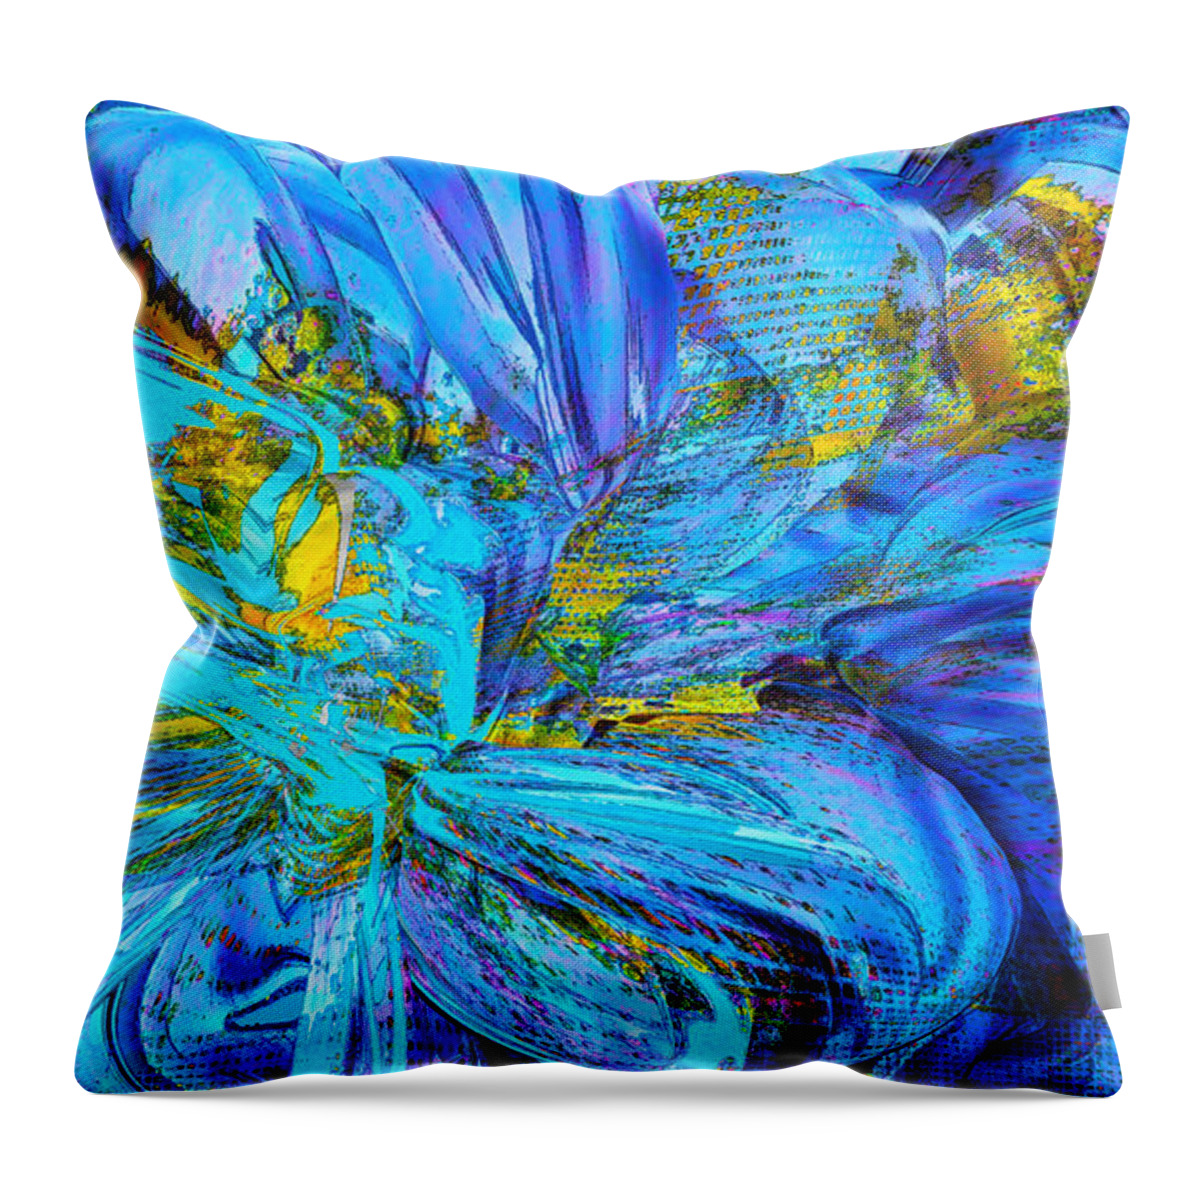 Original Modern Art Abstract Contemporary Vivid Colors Throw Pillow featuring the digital art Blue Trans by Phillip Mossbarger